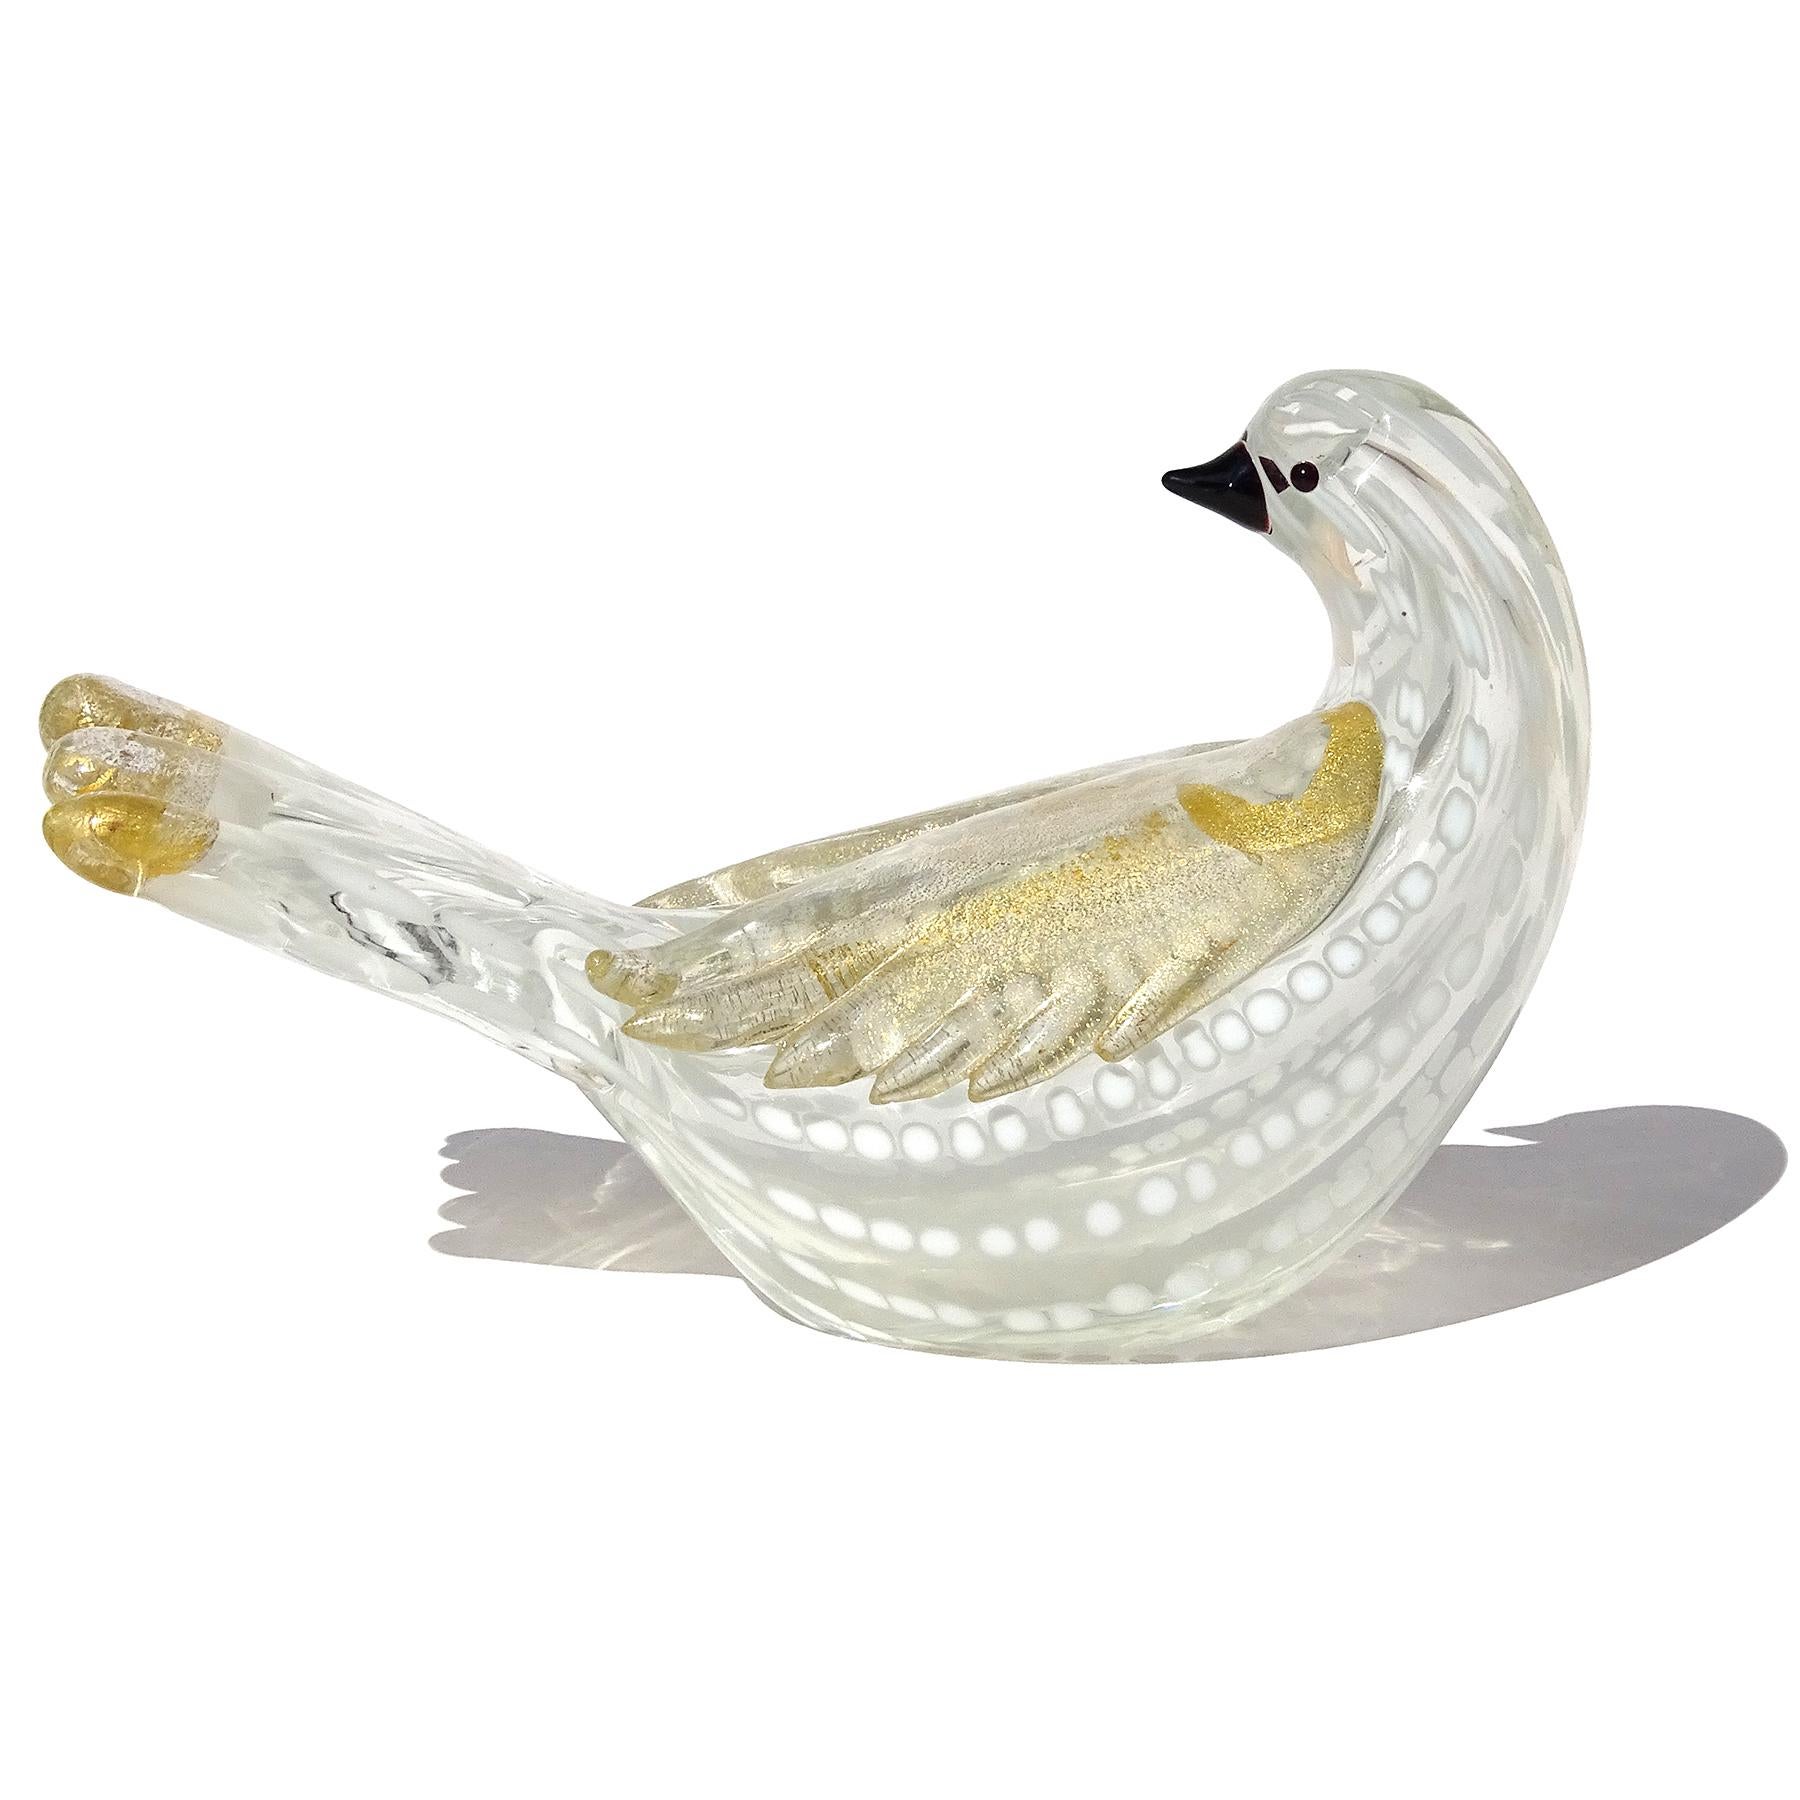 Beautiful vintage Murano hand blown white spots and gold flecks Italian art glass figurine / sculpture. Created in the manner of the Barovier e Toso Company. The bird has a pattern made with lines of white dots on a clear glass body. The wings and